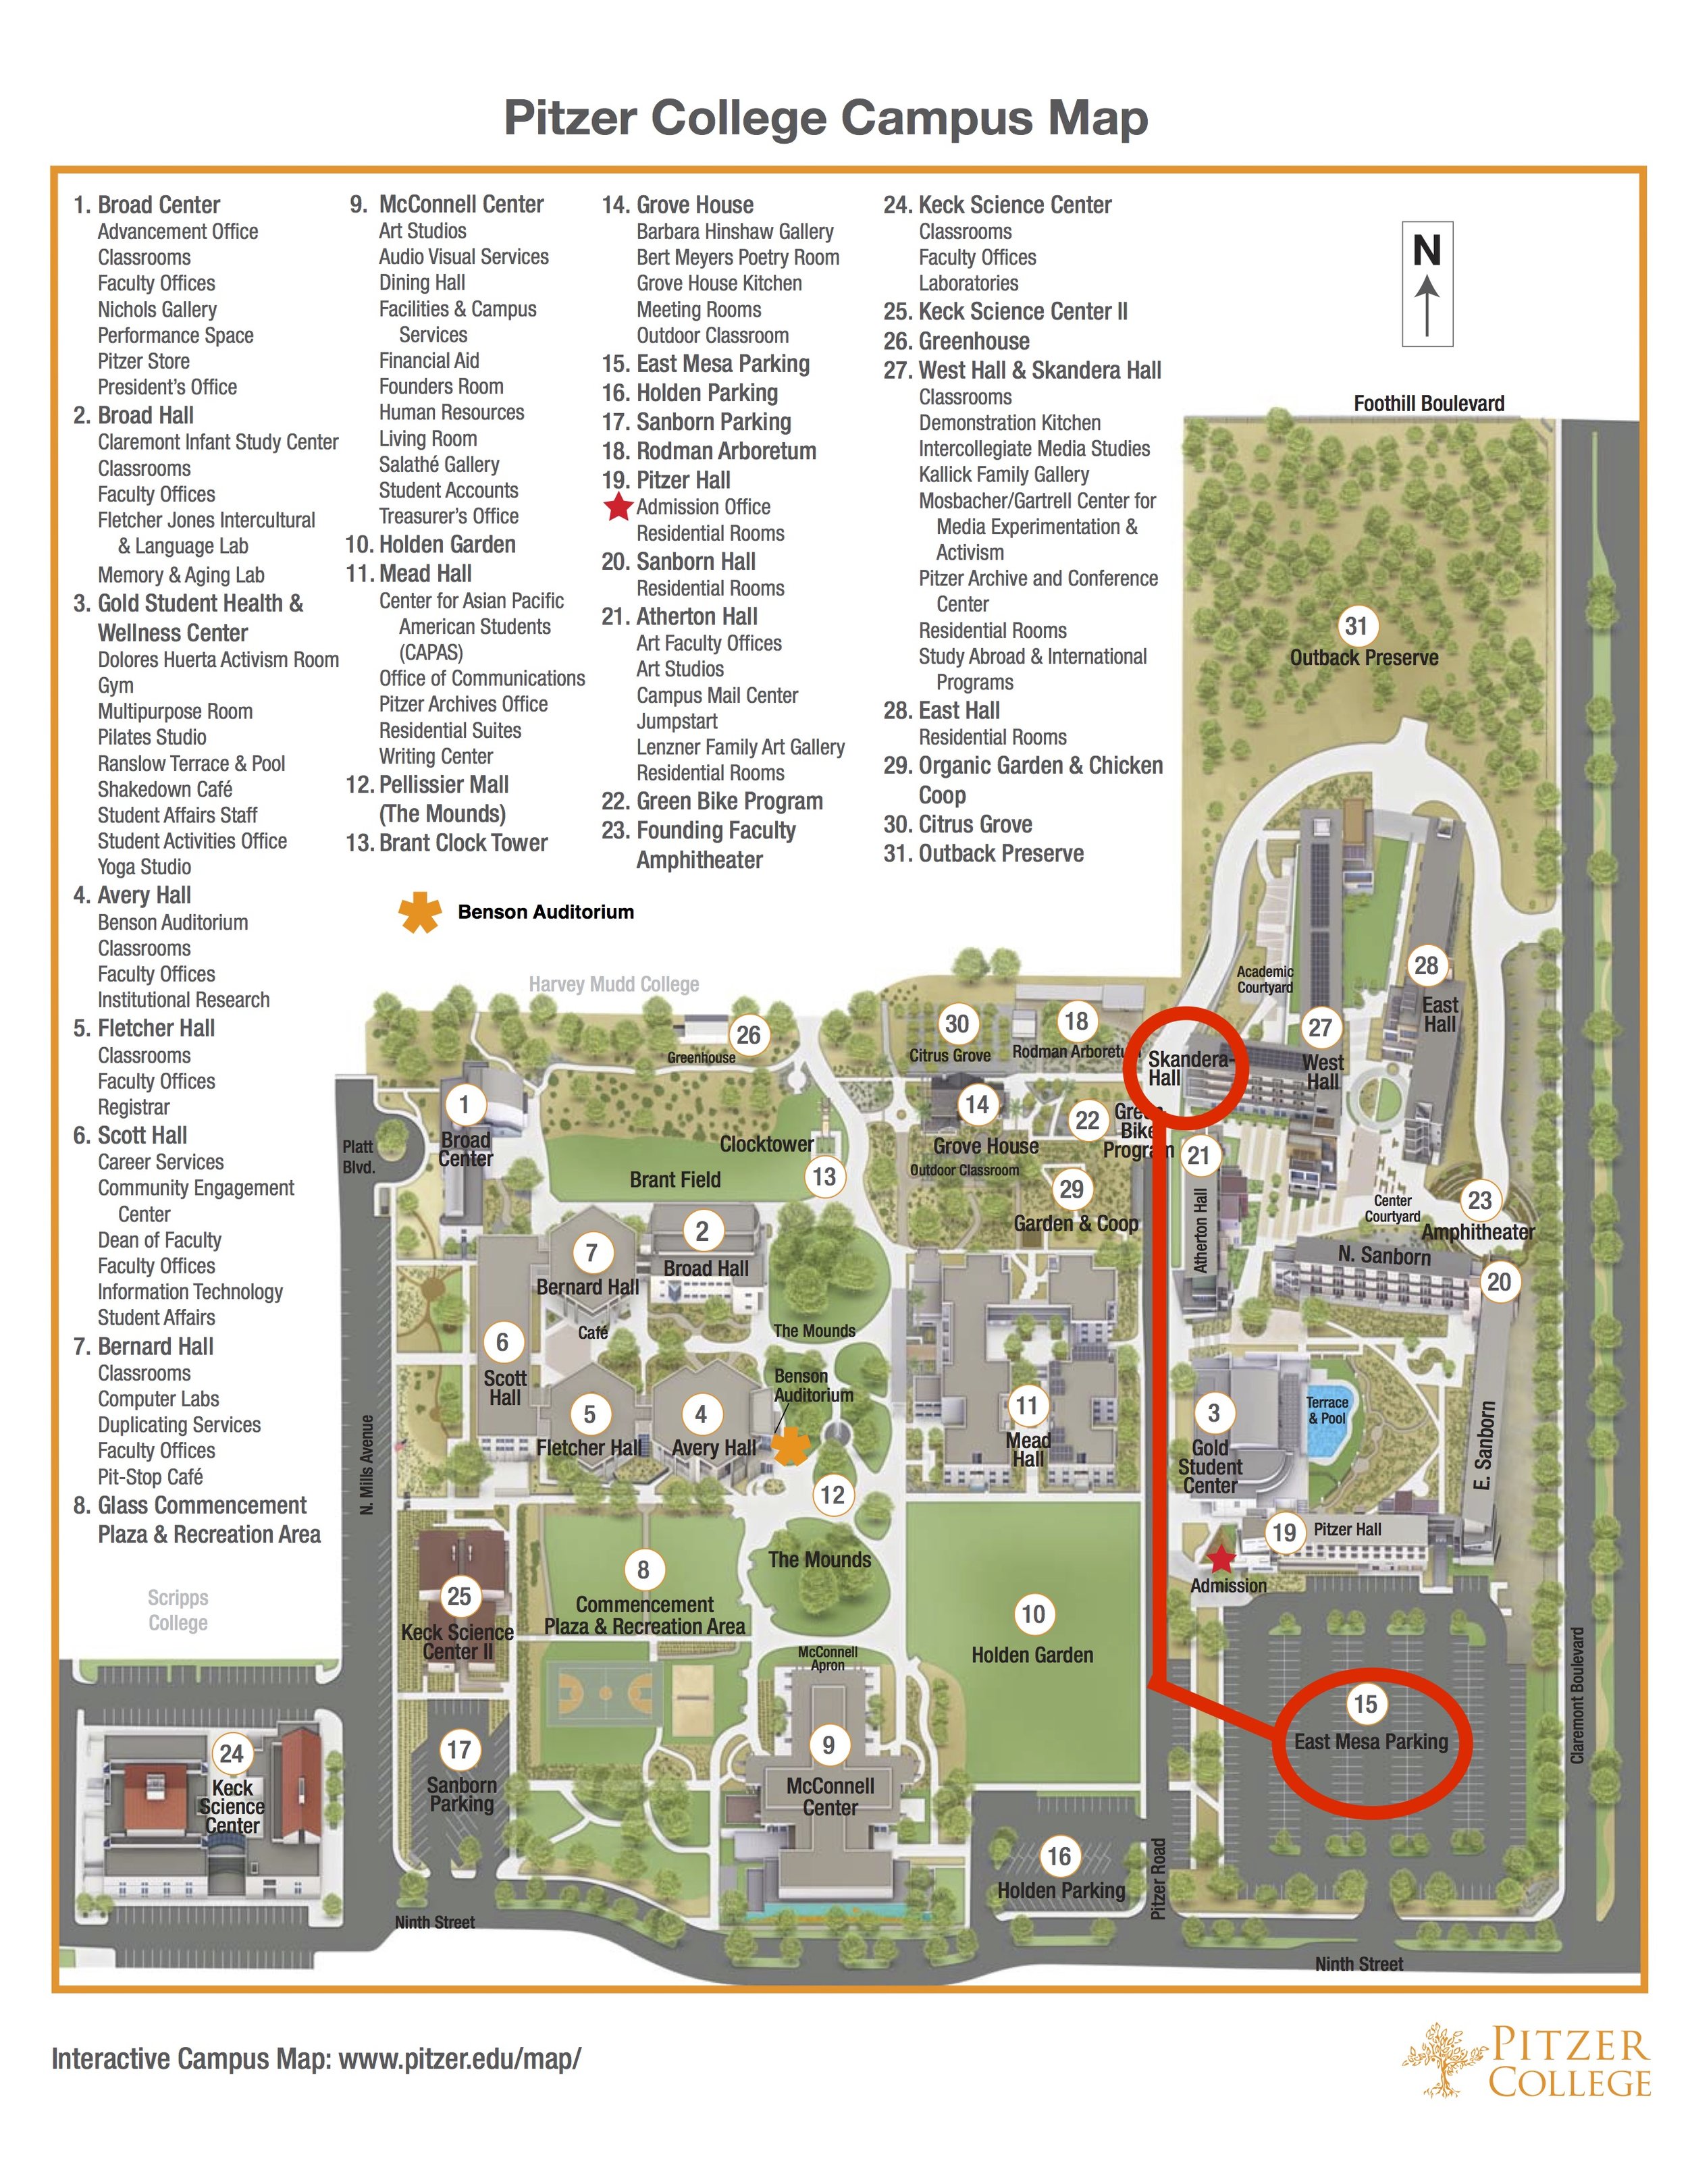 Pitzer College Campus Map – Interactive Map